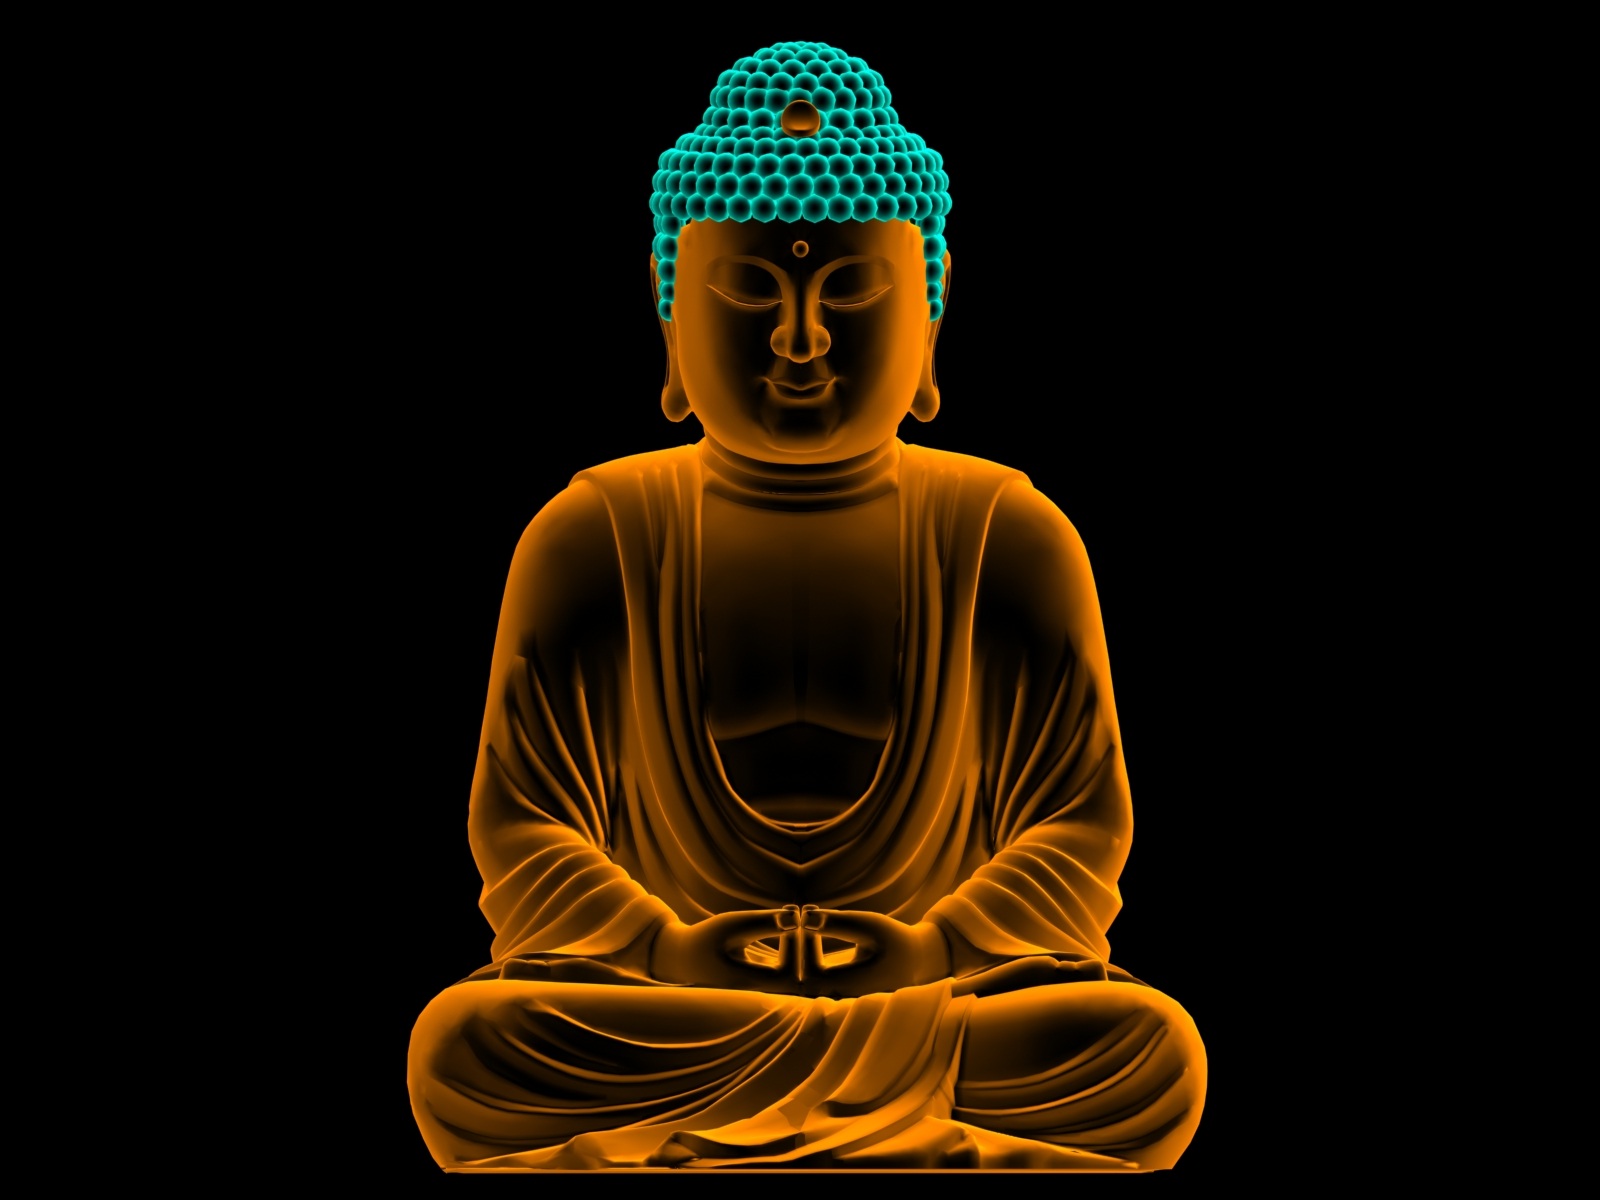 buddha hd wallpapers images for lord buddha hd wallpapers lord buddha